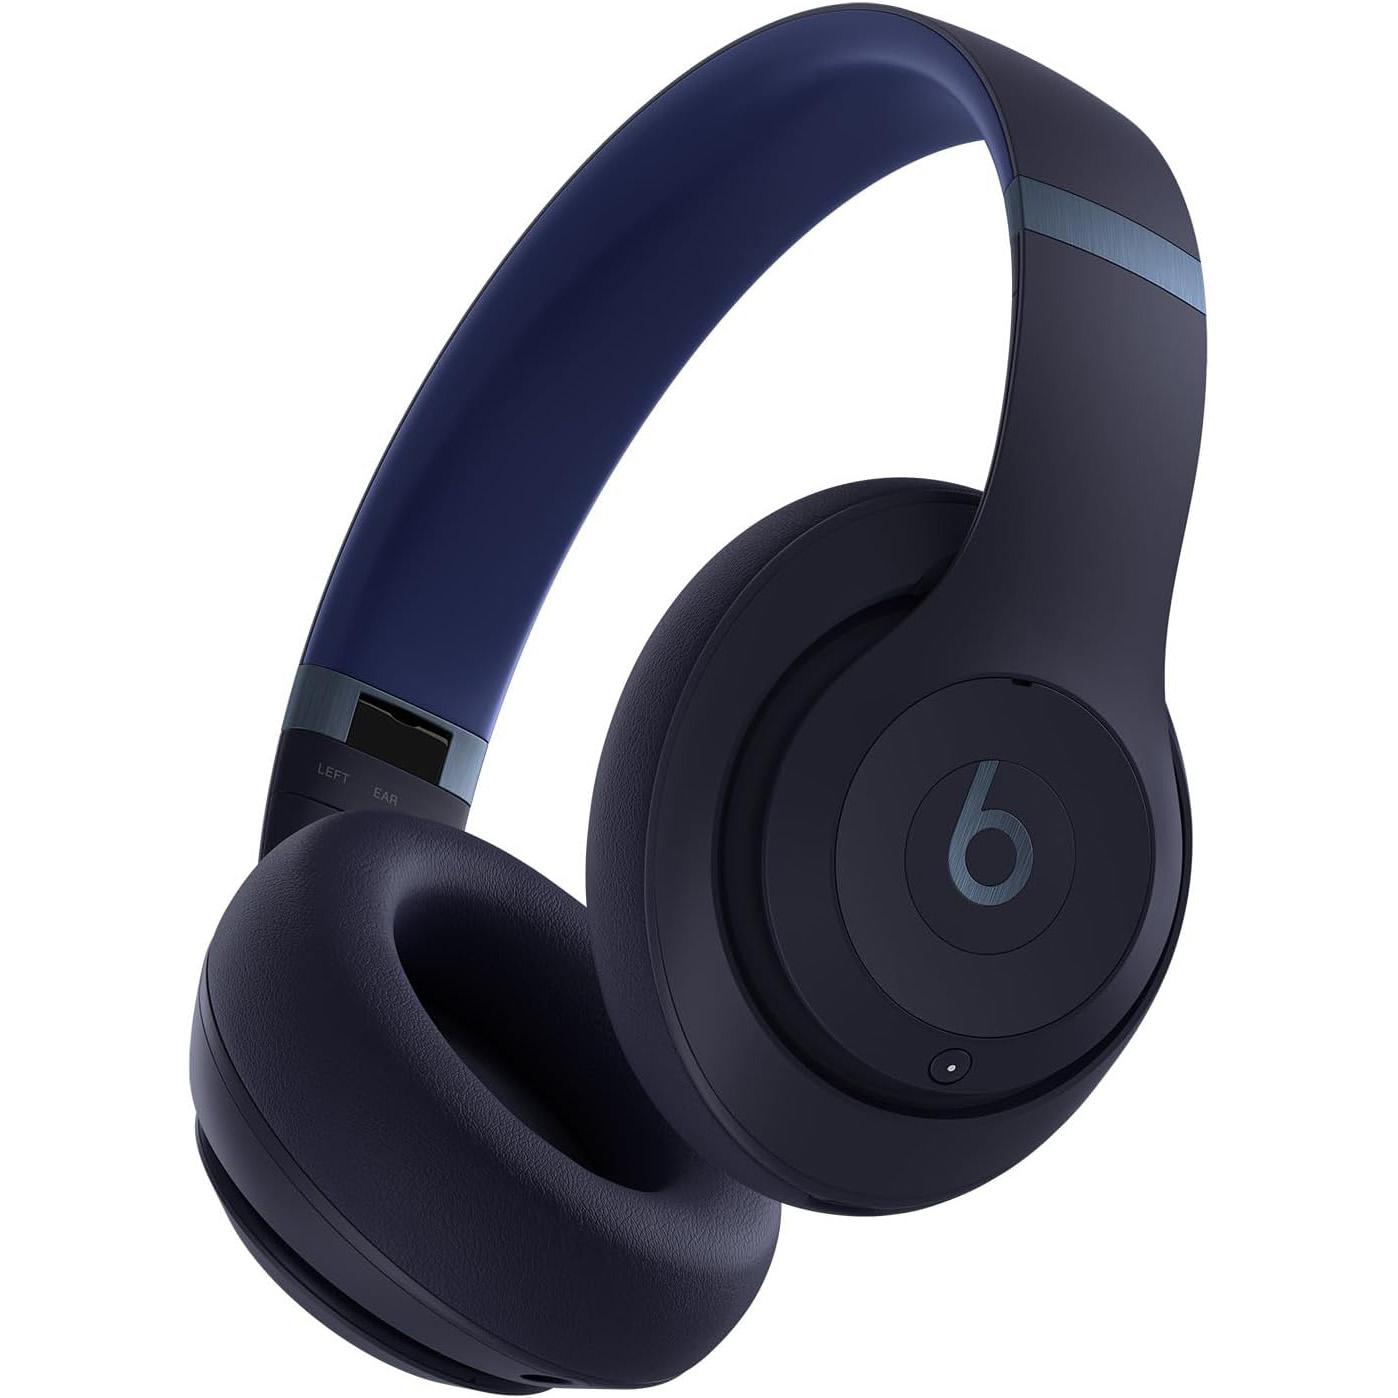 Beats Studio Pro Wireless Bluetooth Noise Cancelling Headphones for $179.99 Shipped